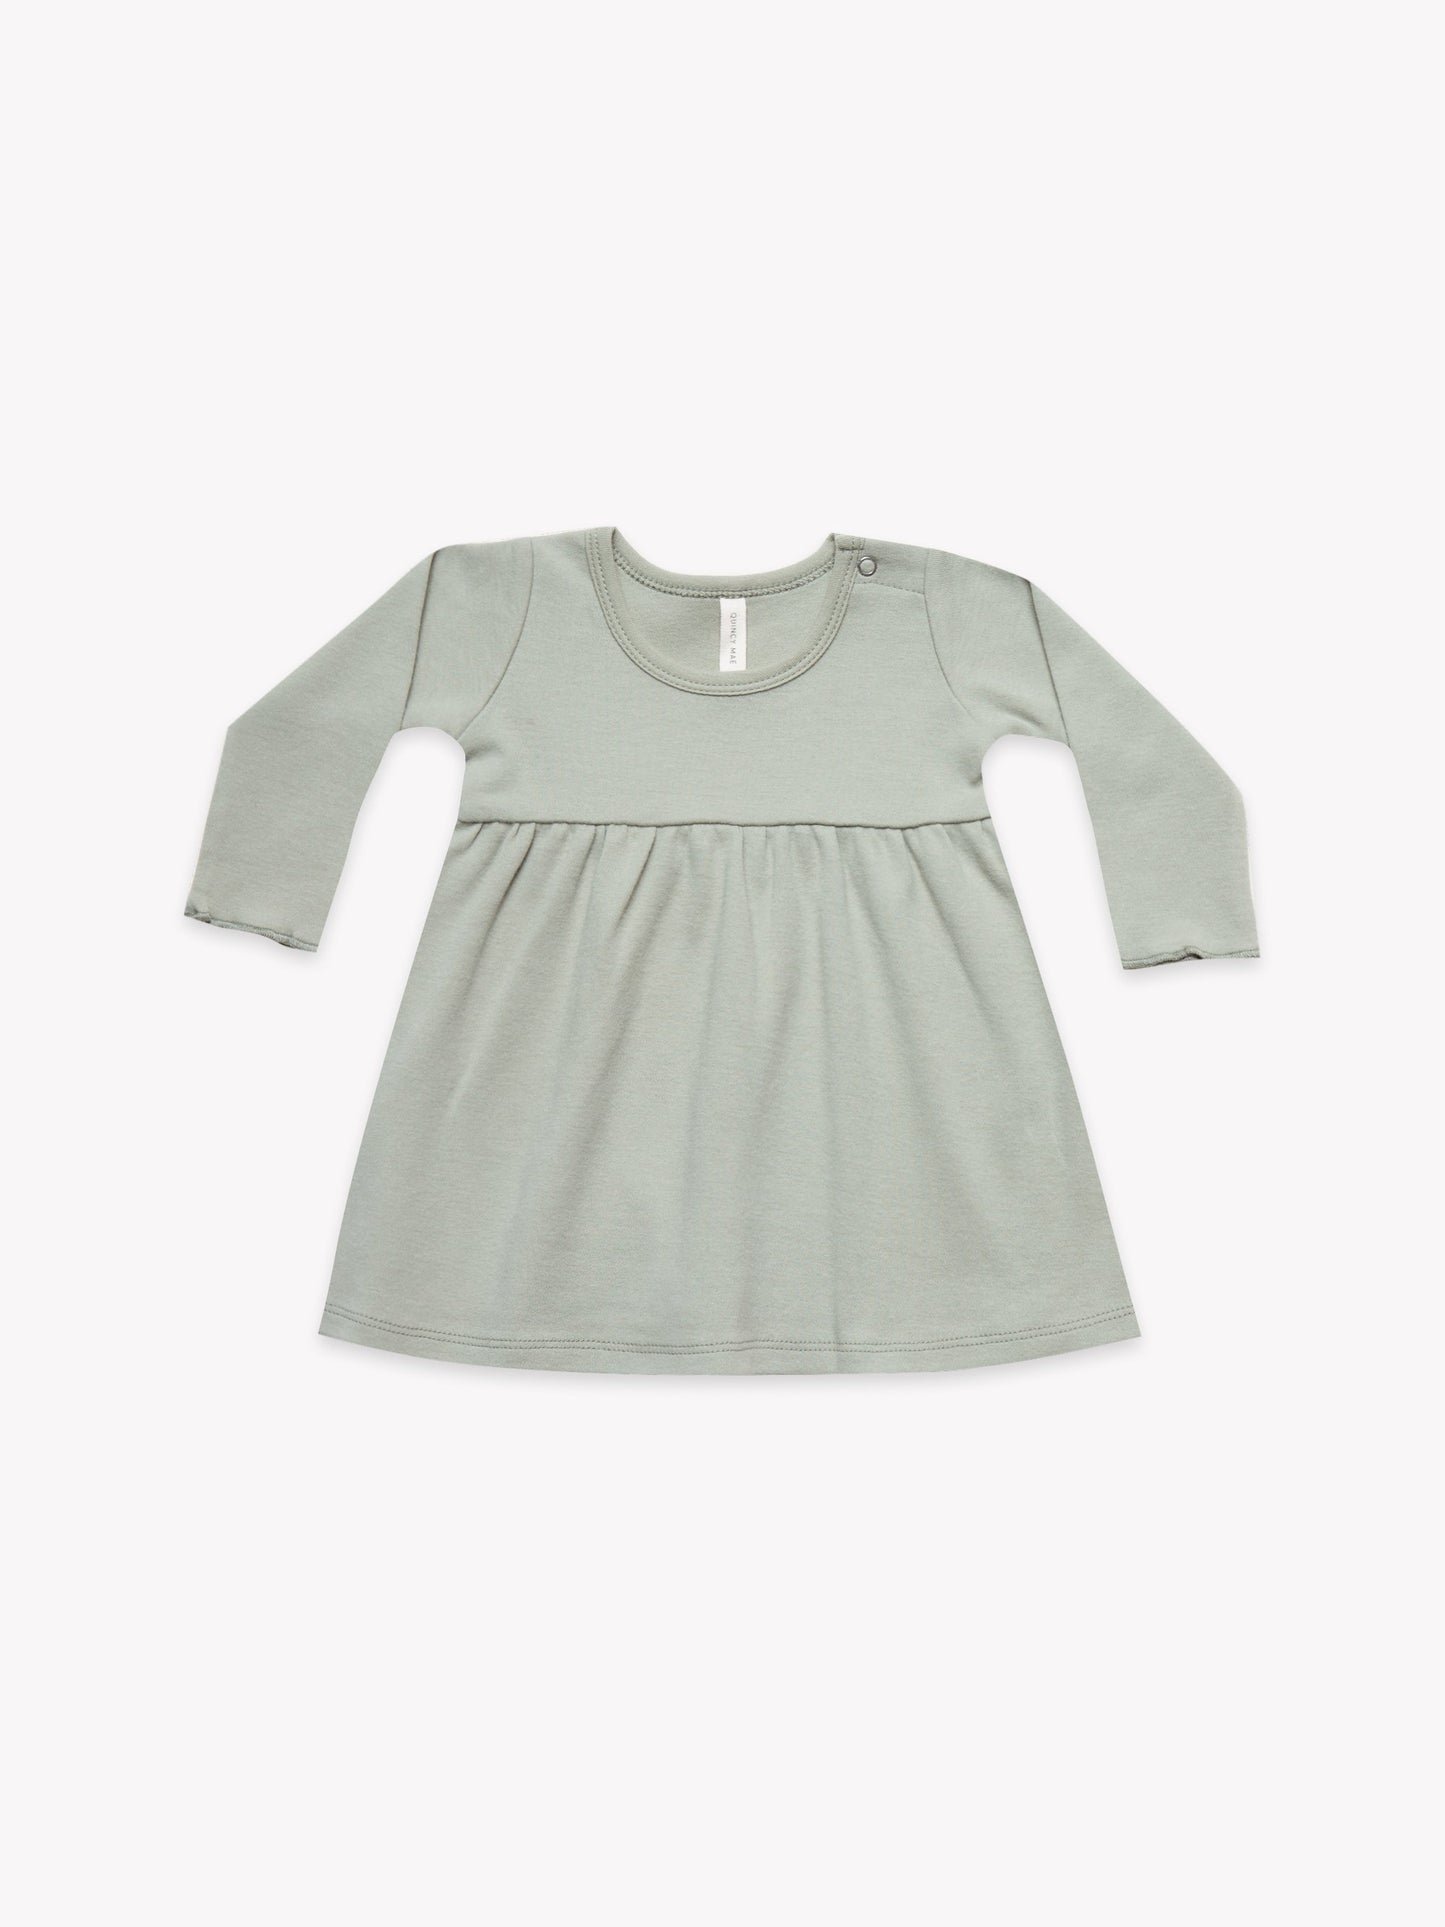 Quincy Mae - Baby Dress - Sage